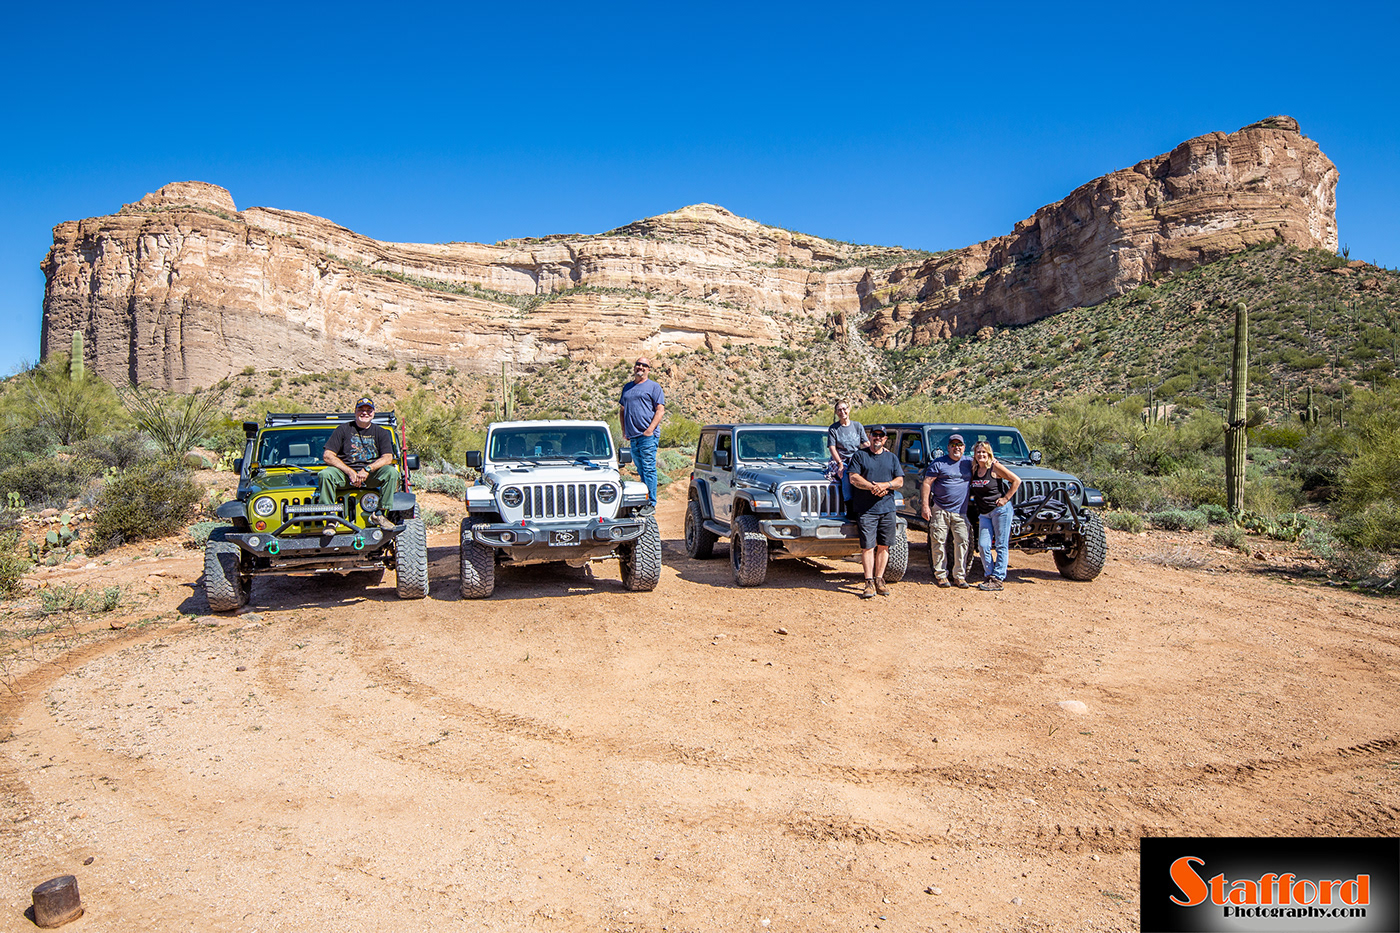 4WD 4x4 jeep Landscape Nature Offroad Photography  Wrangler